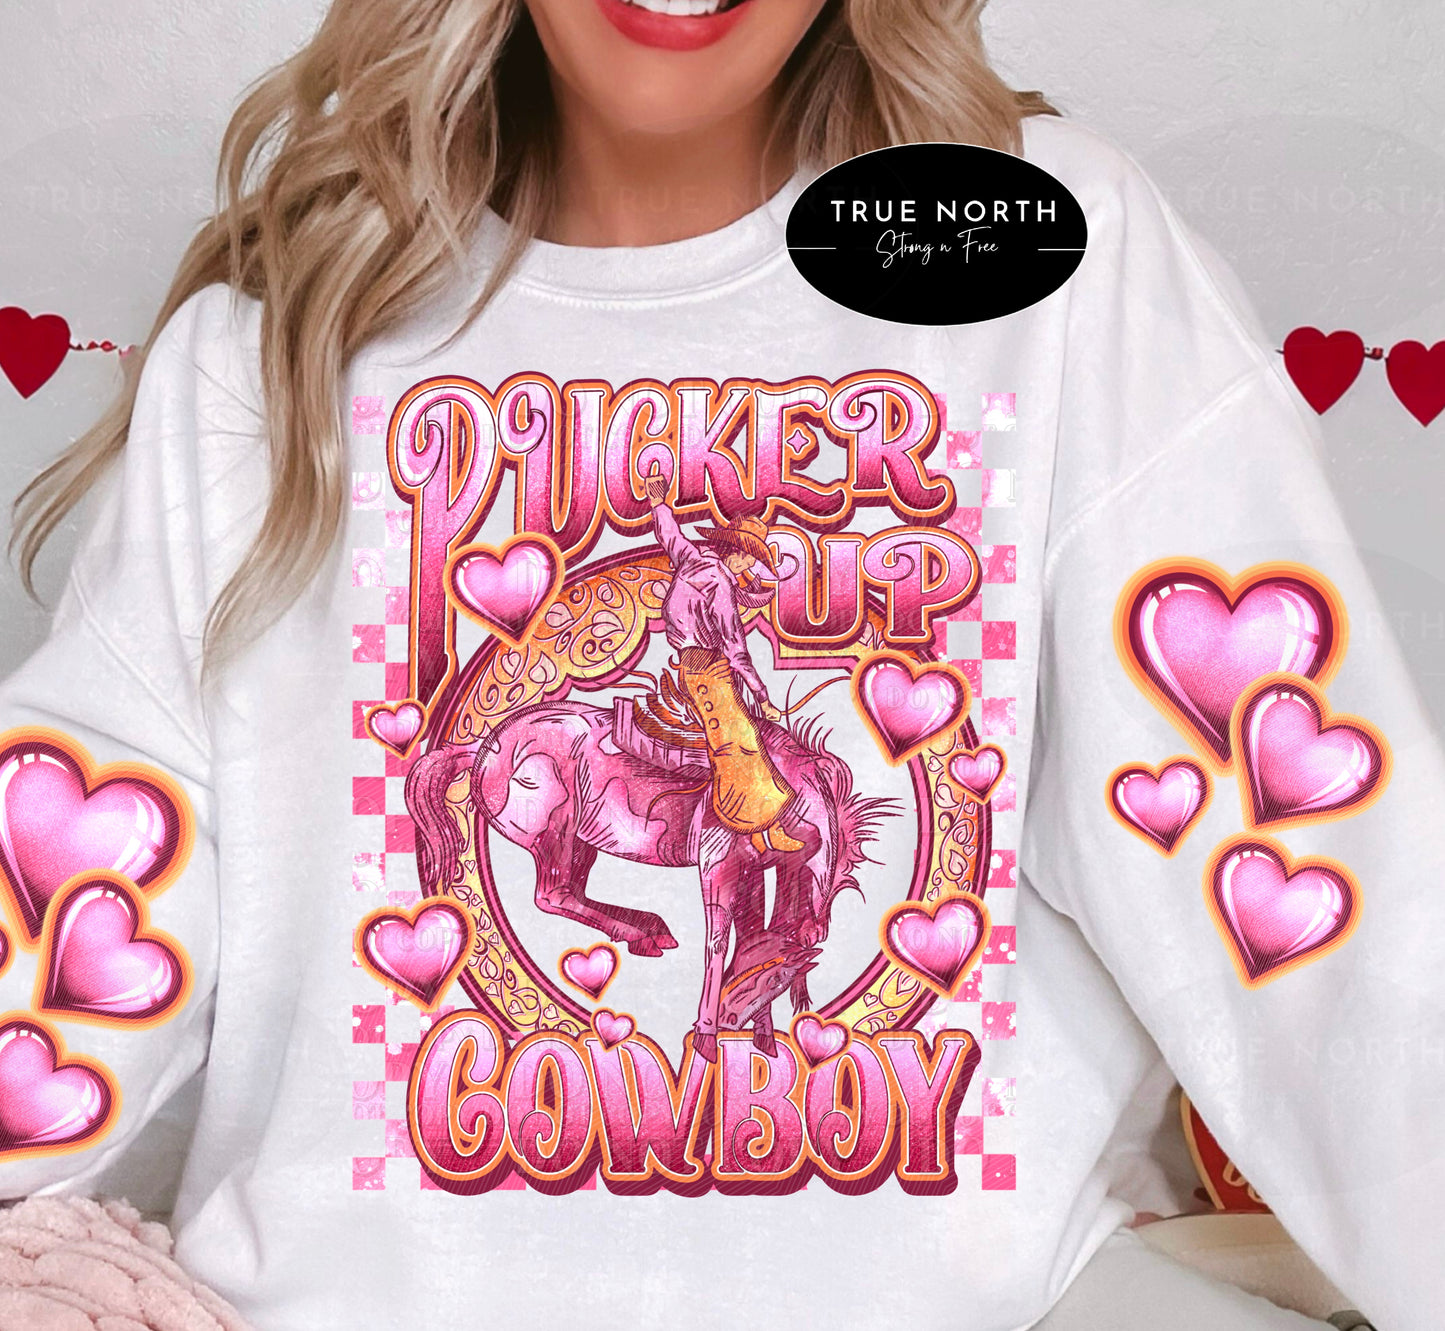 DTF Transfer Valentines Pucker Up Cowboy Sleeve offered